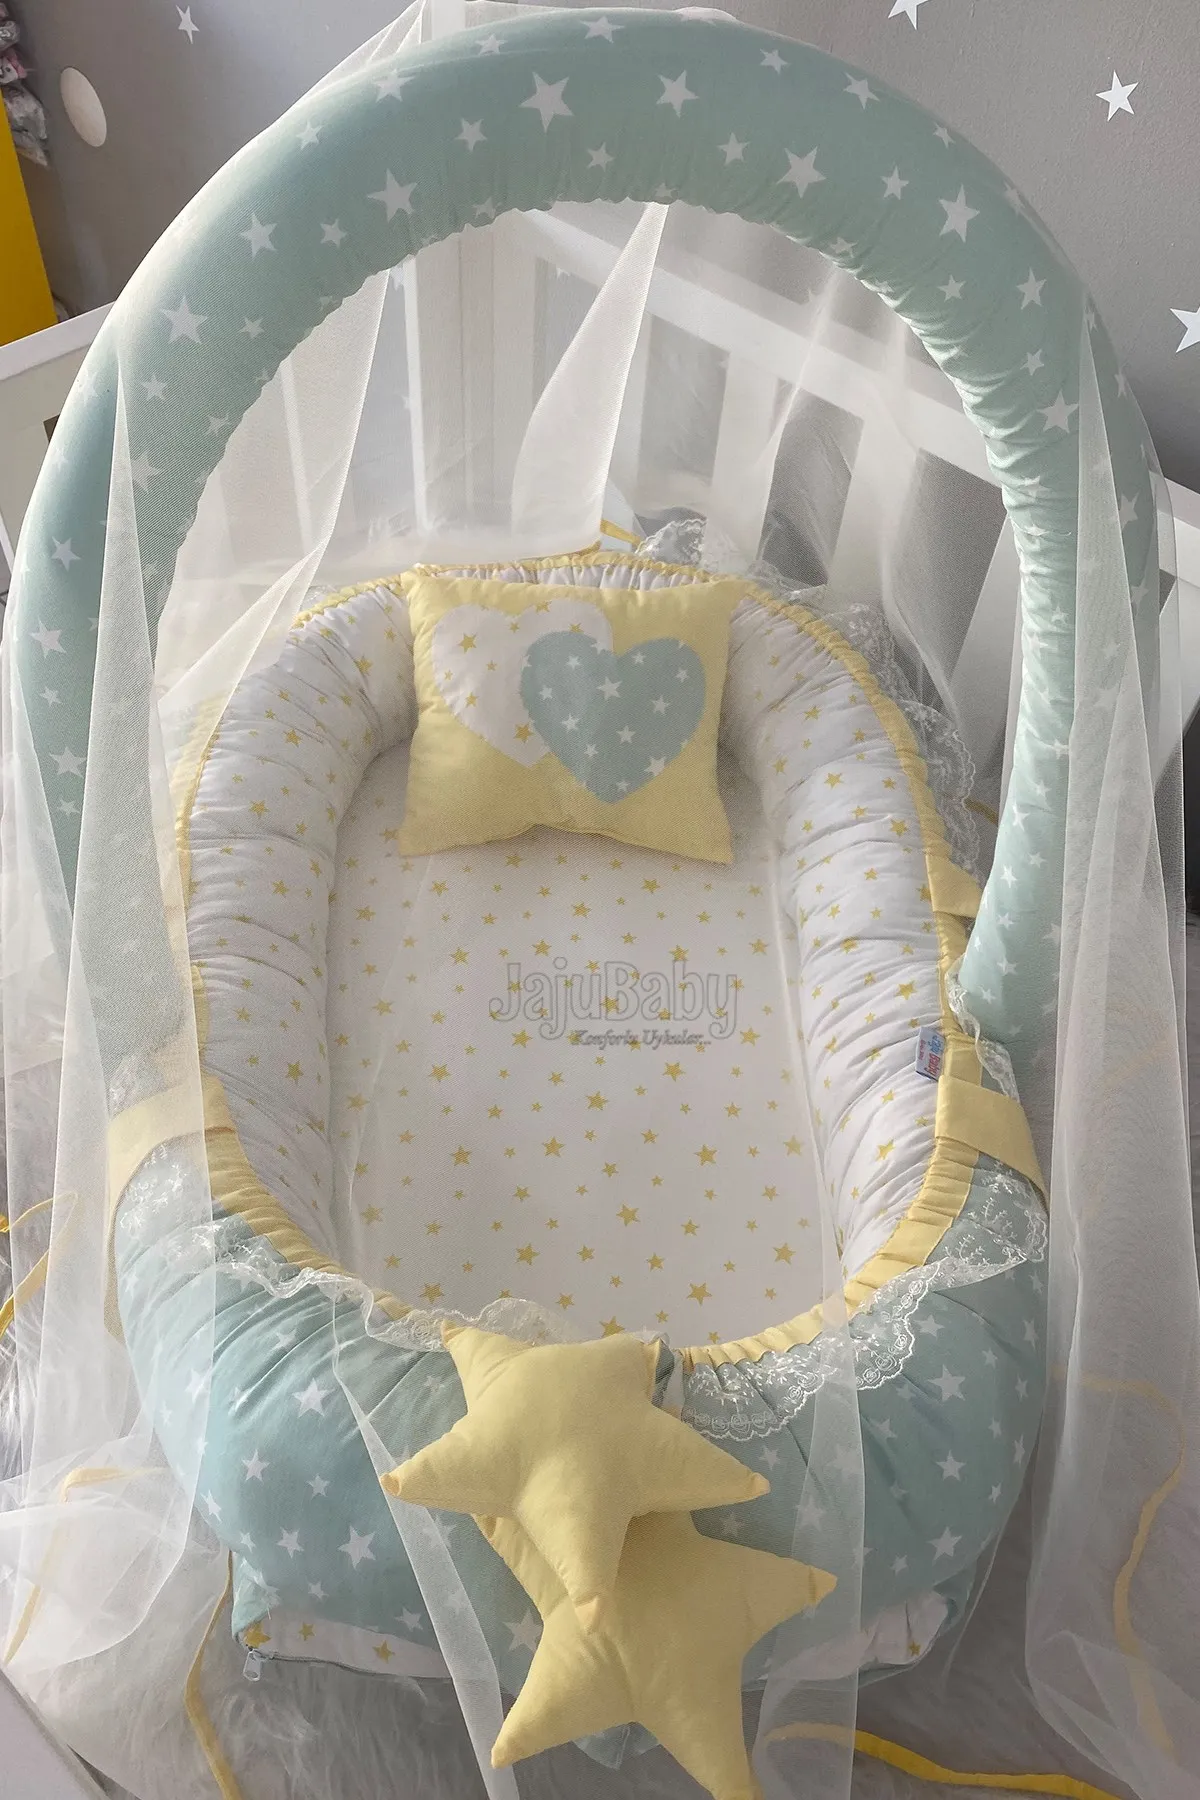 Jaju Baby Handmade Green Star Fabric with Mosquito Net and Toy Hanger Luxury Design Babynest Portable Baby Bed Mother Side